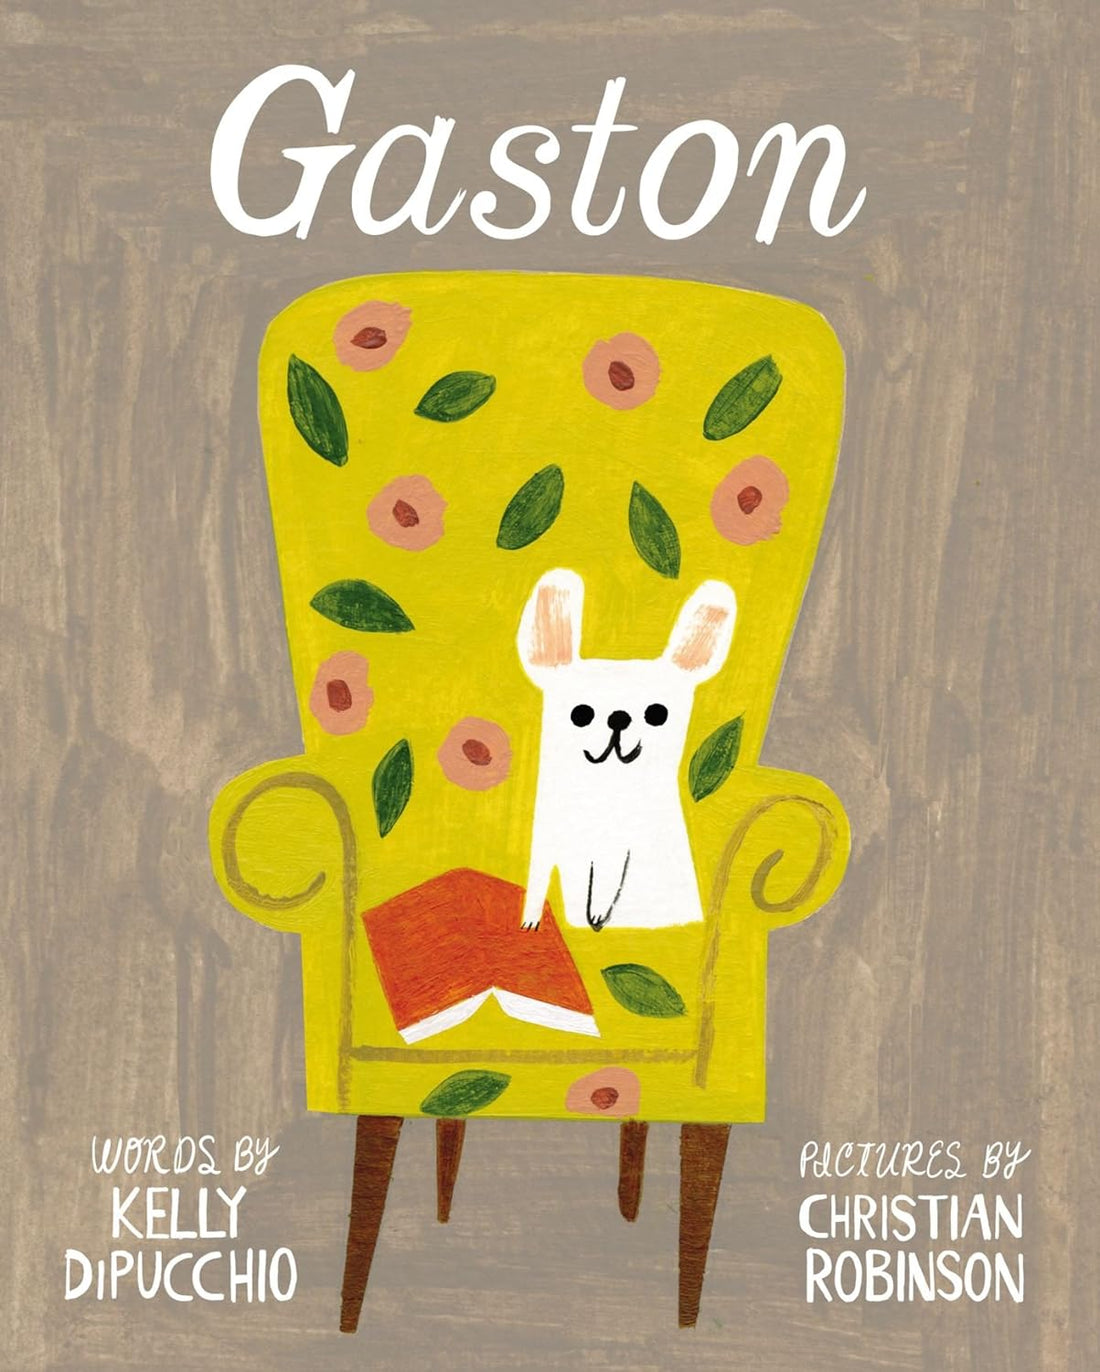 Gaston words by Kelly DiPucchio